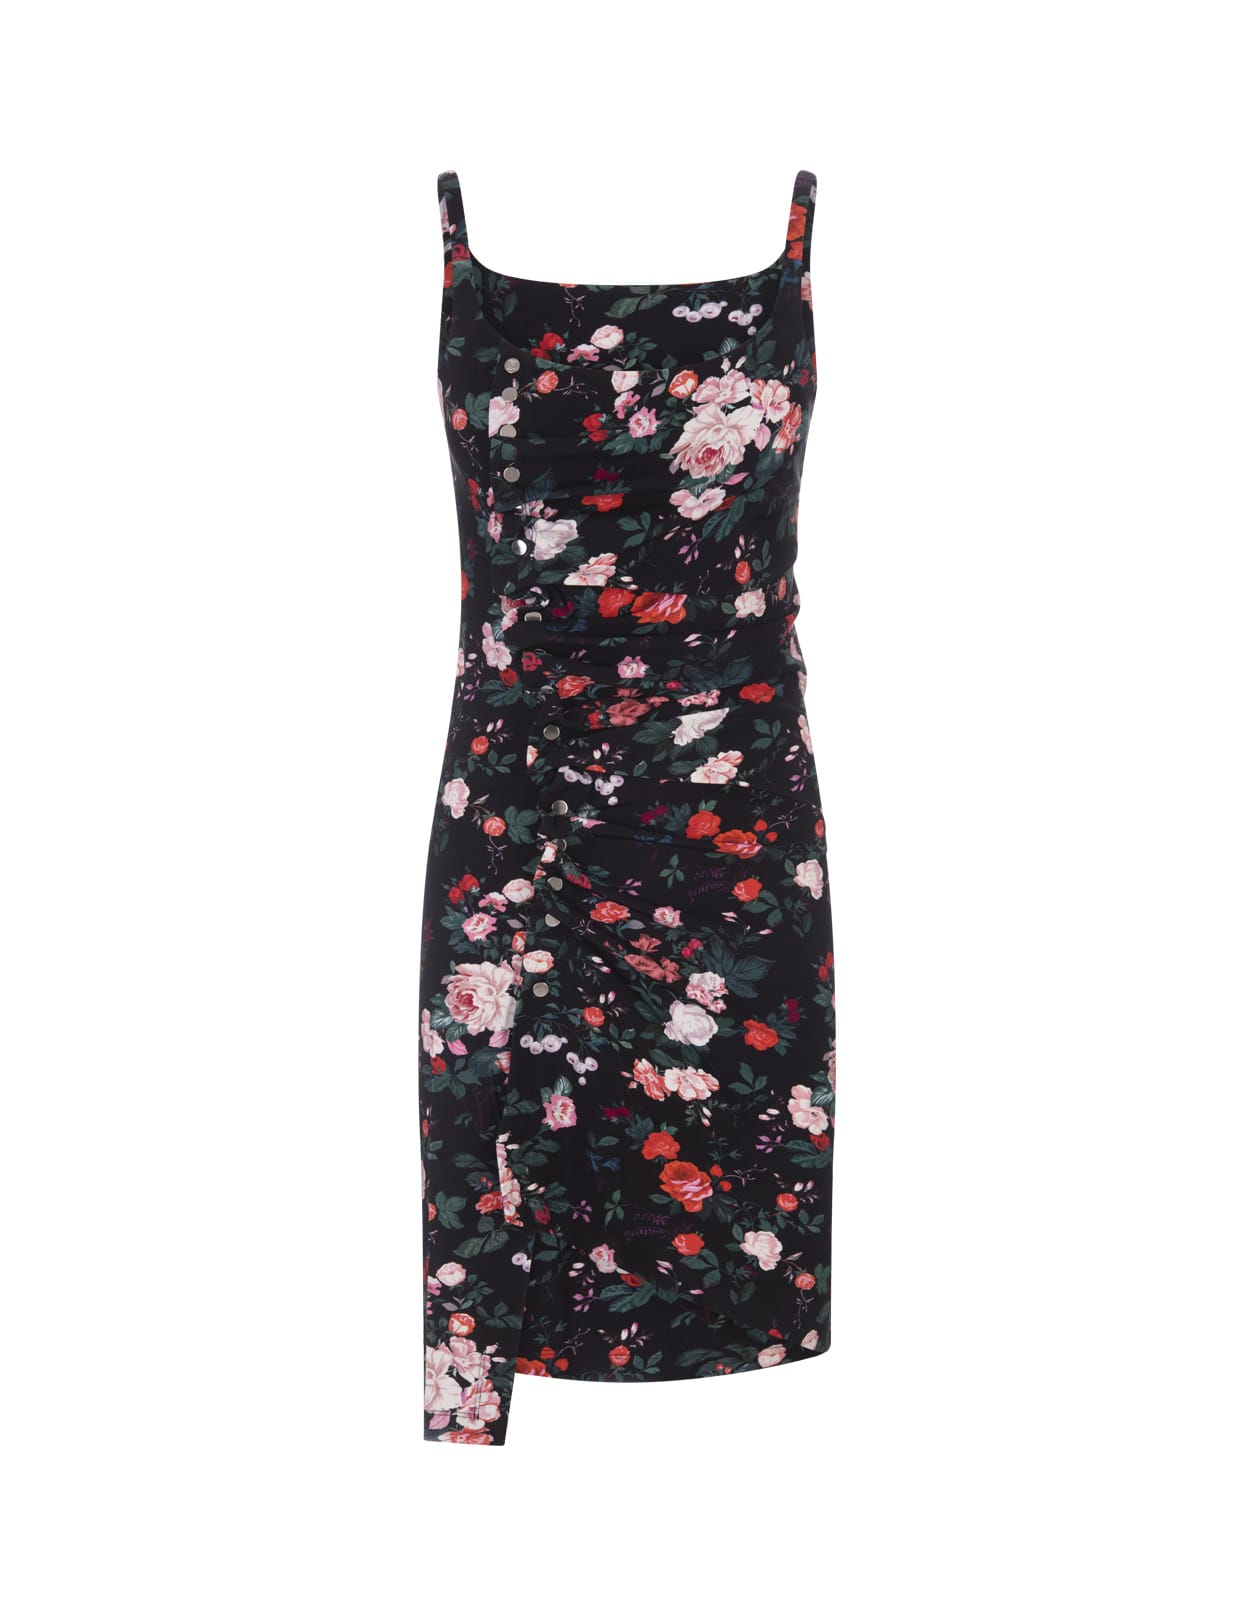 RABANNE BLACK FLORAL MINI DRESS WITH DRAPING